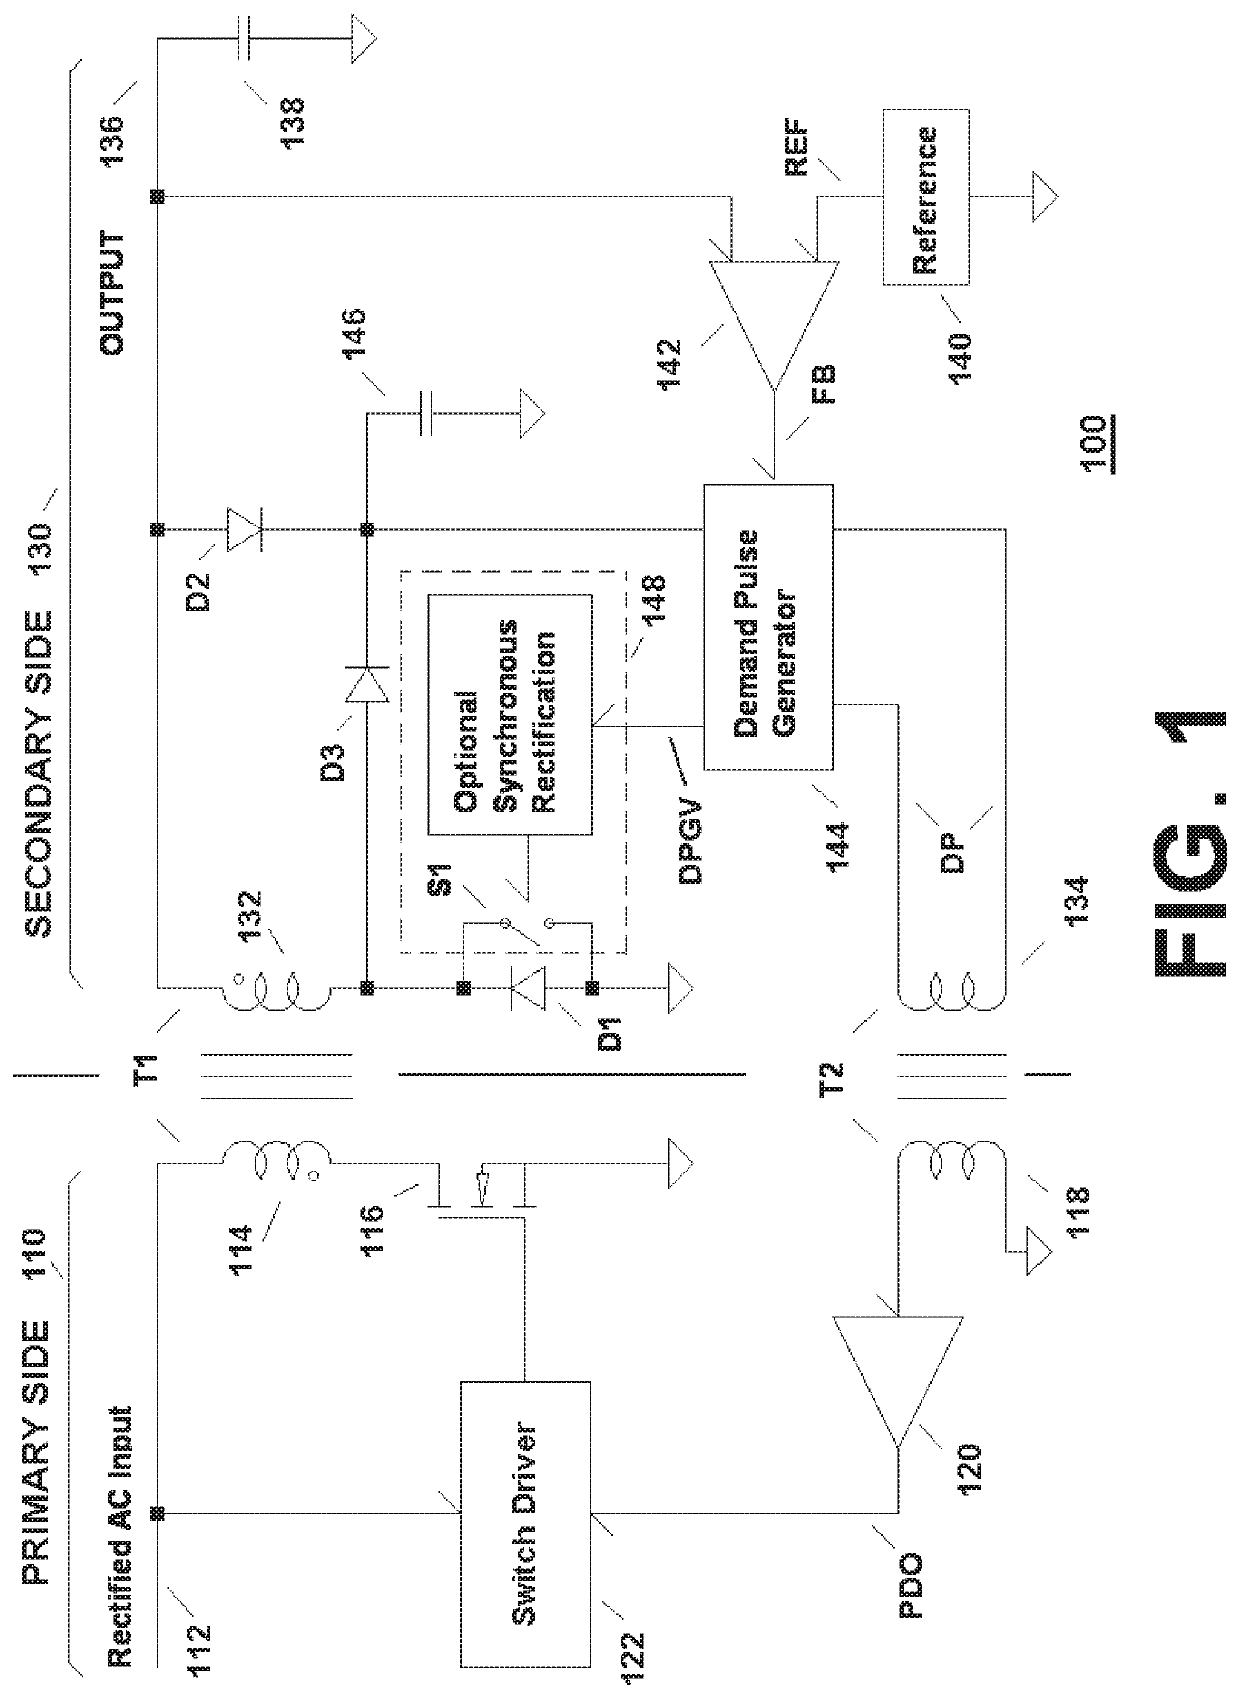 Trigger circuitry for fast, low-power state transitions